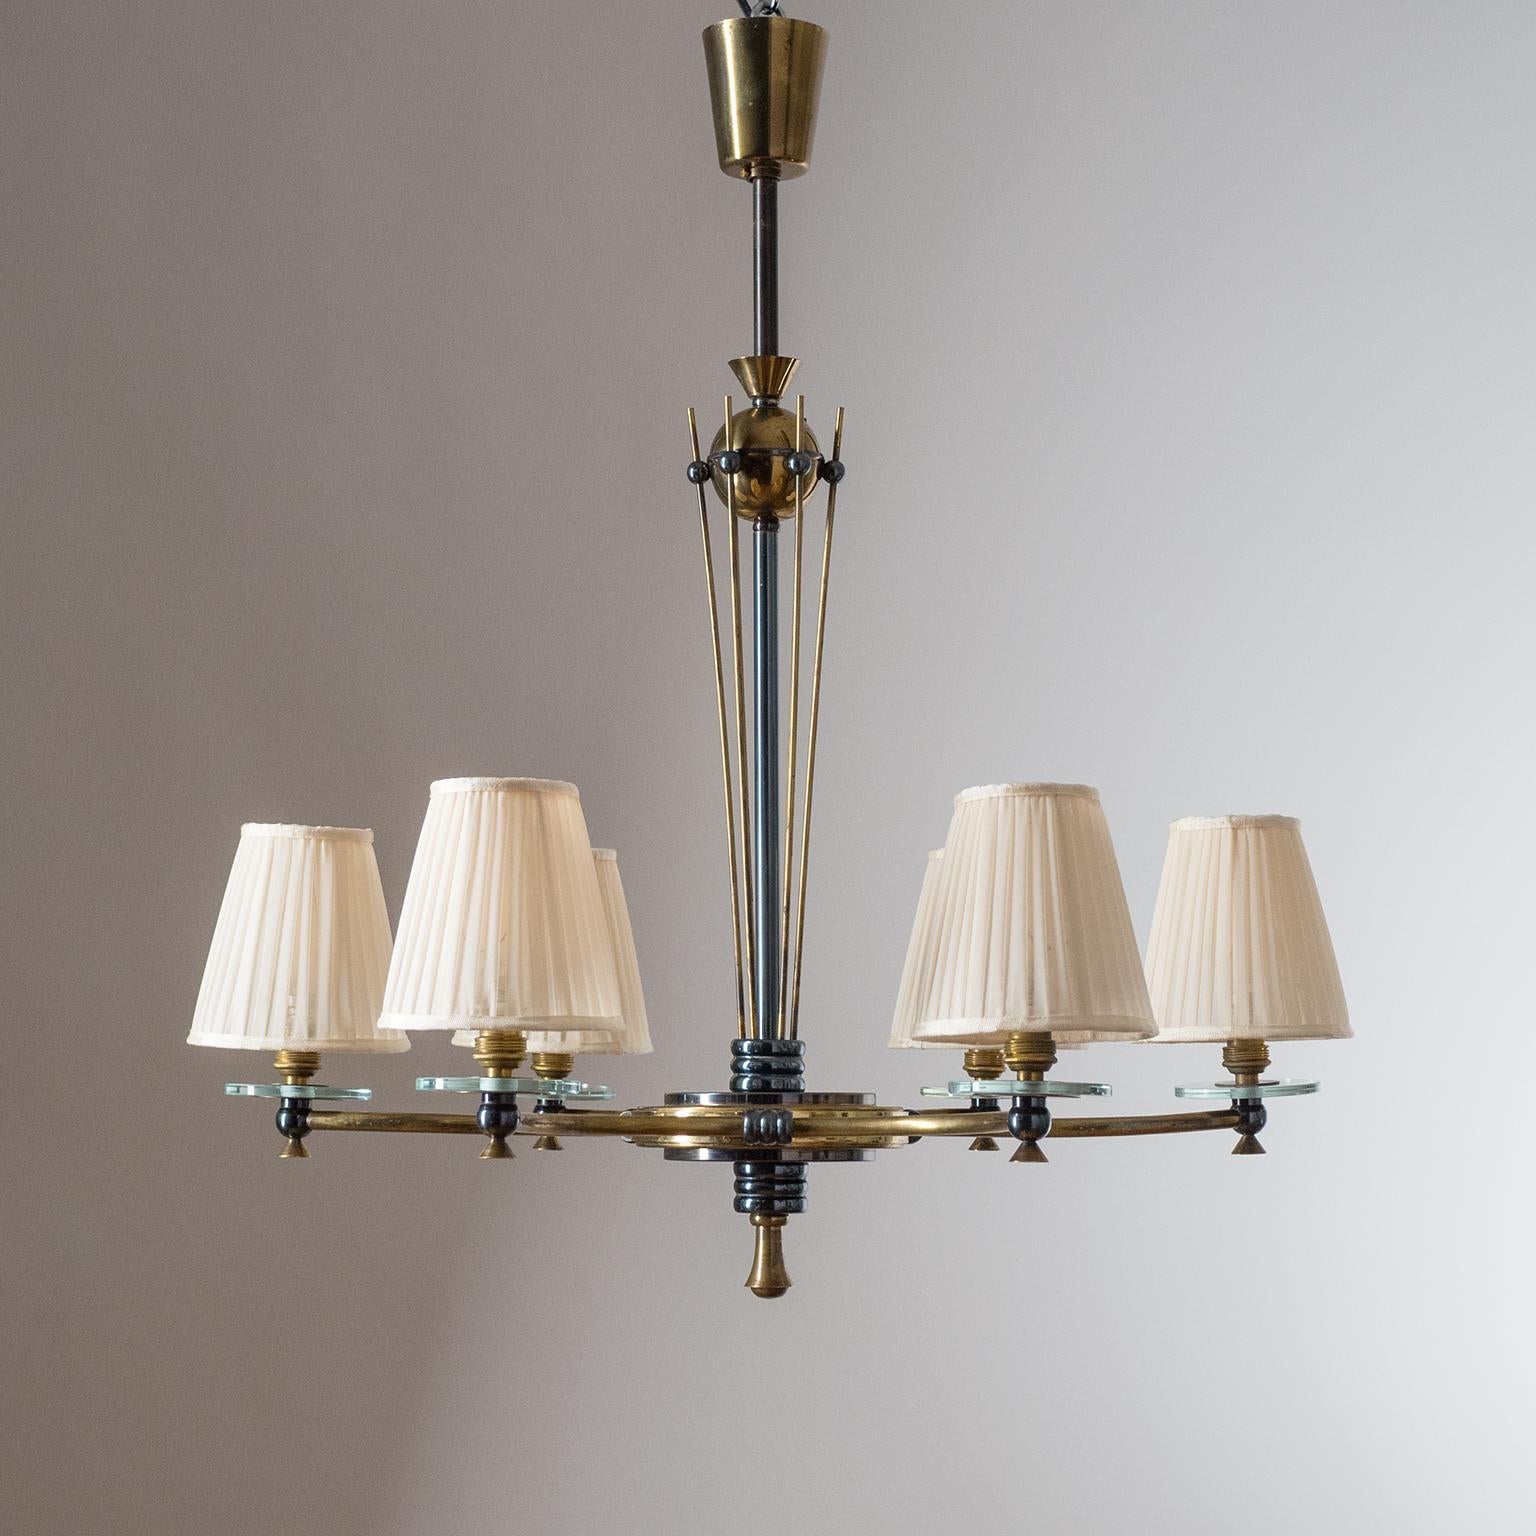 Rare French brass chandelier, 1940s-1950s. Very intricate and detailed hardware in alternating dark and light patinated brass with glass disc accents. Very nice original condition with some age-related patina on the brass. Brass and ceramic E14